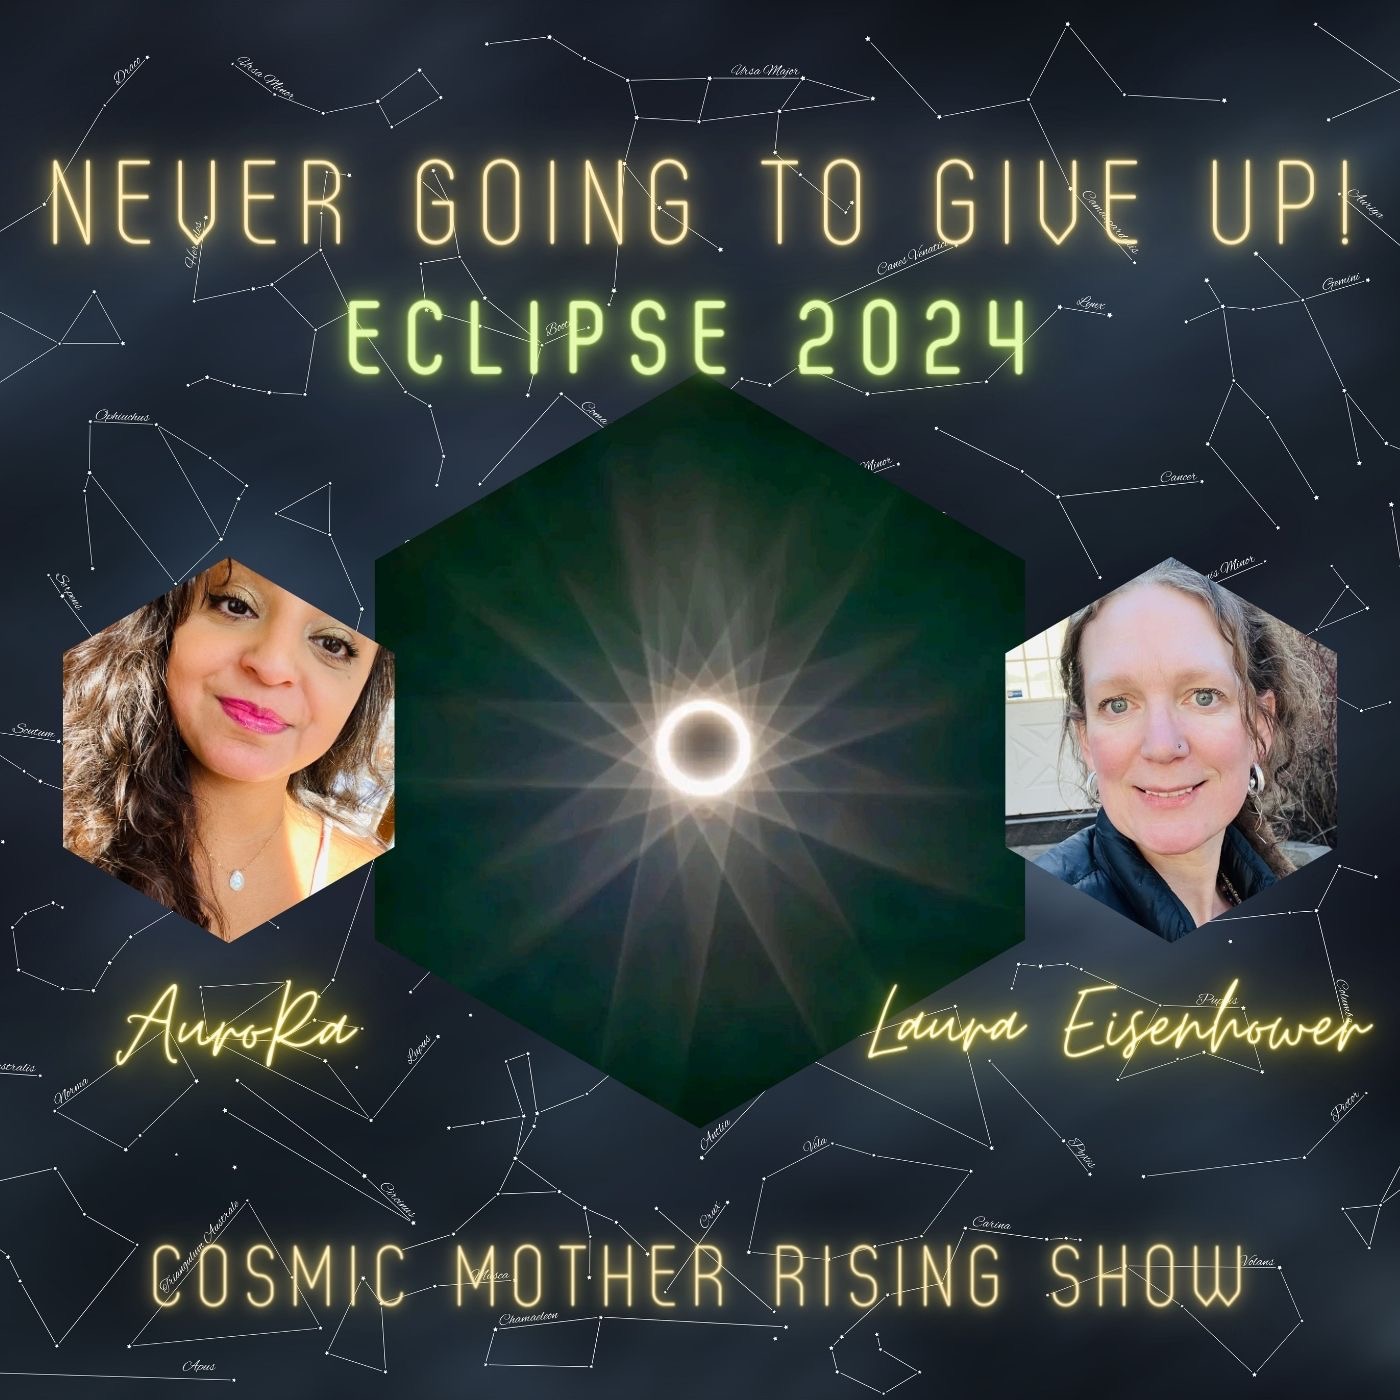 NEVER GOING TO GIVE UP! Eclipse 2024 | Cosmic Mother Rising Show Ep 14